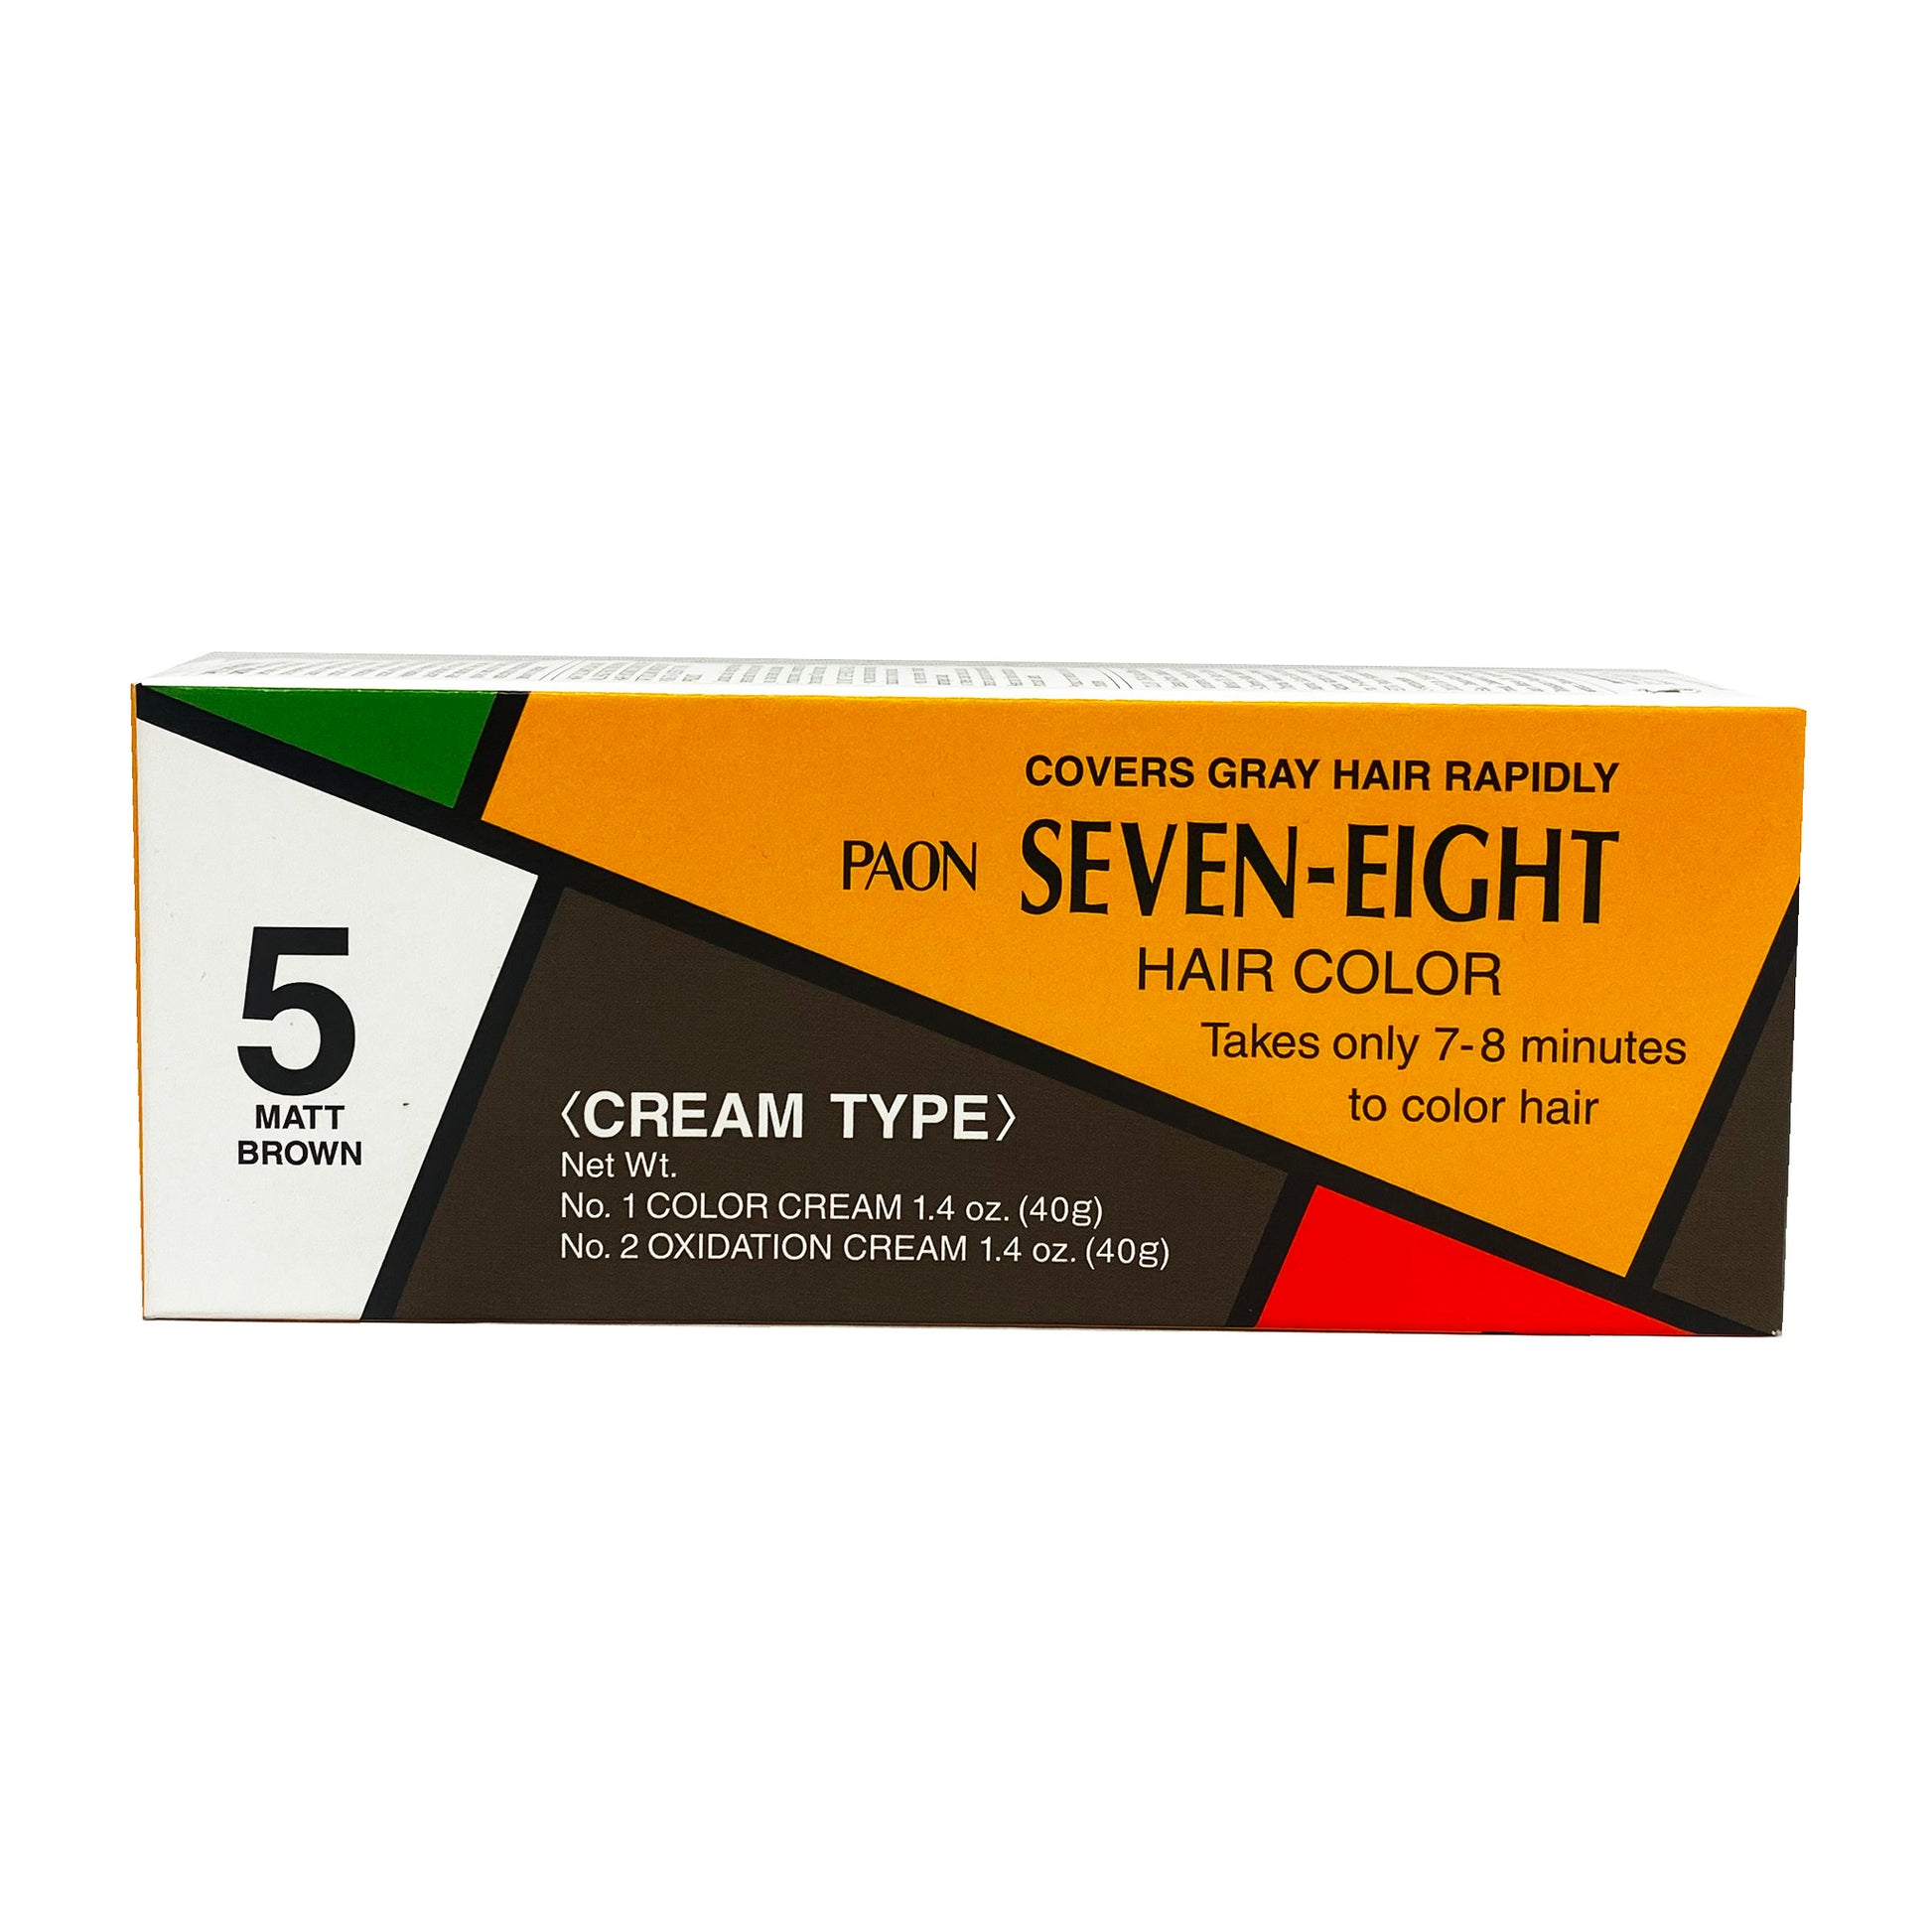 Front graphic view of Paon Seven-Eight Hair Color Cream Type Refill - 5 Matt Brown 2.8oz (80g)